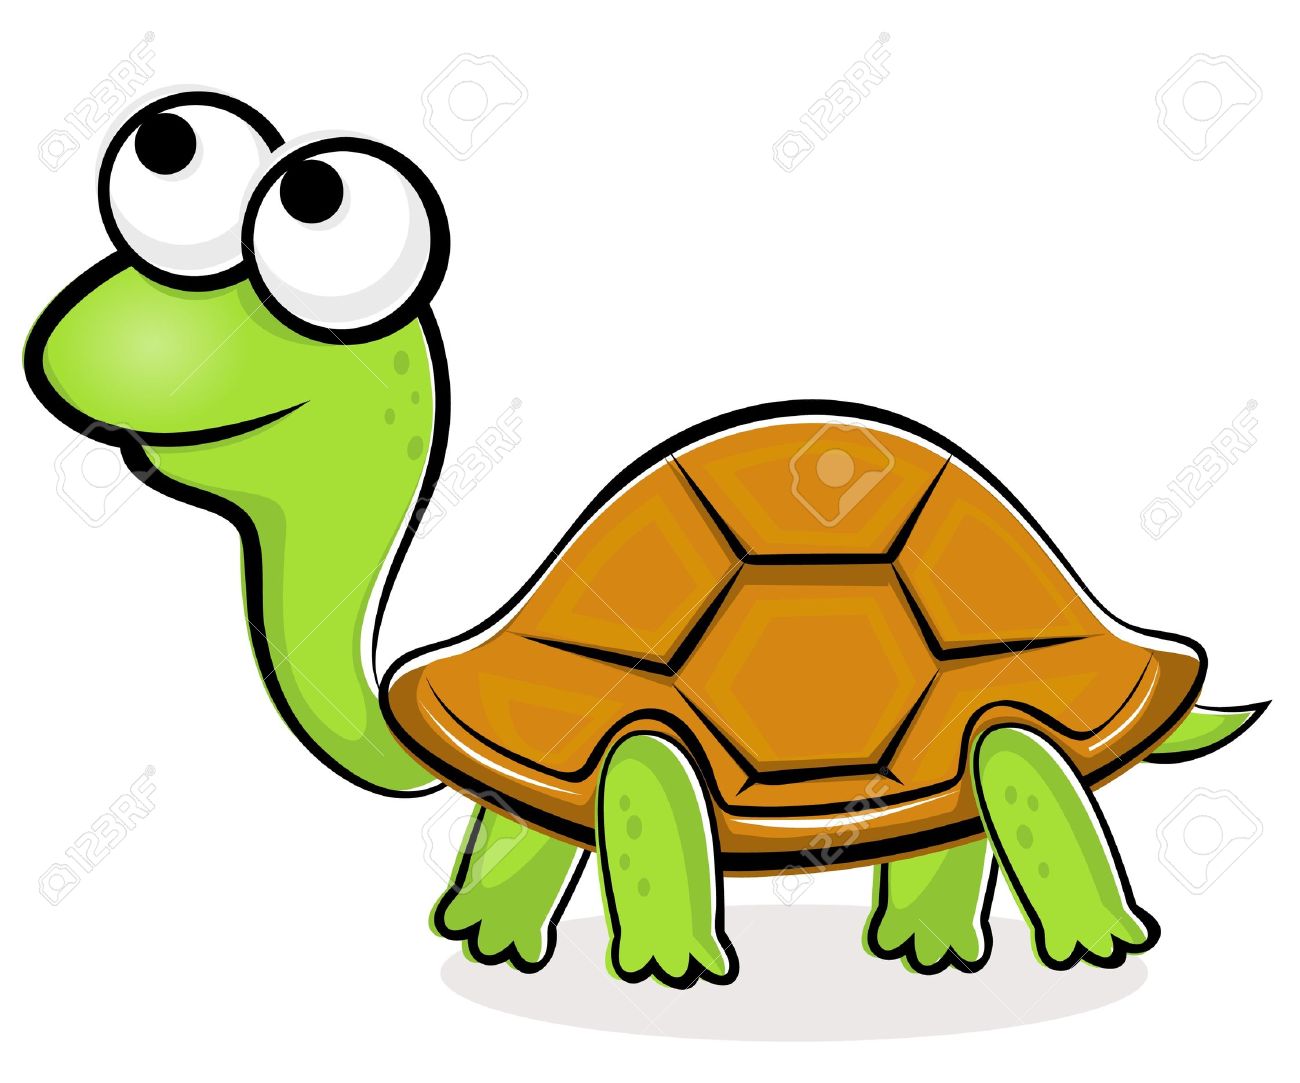 ... Clipart images of tortois